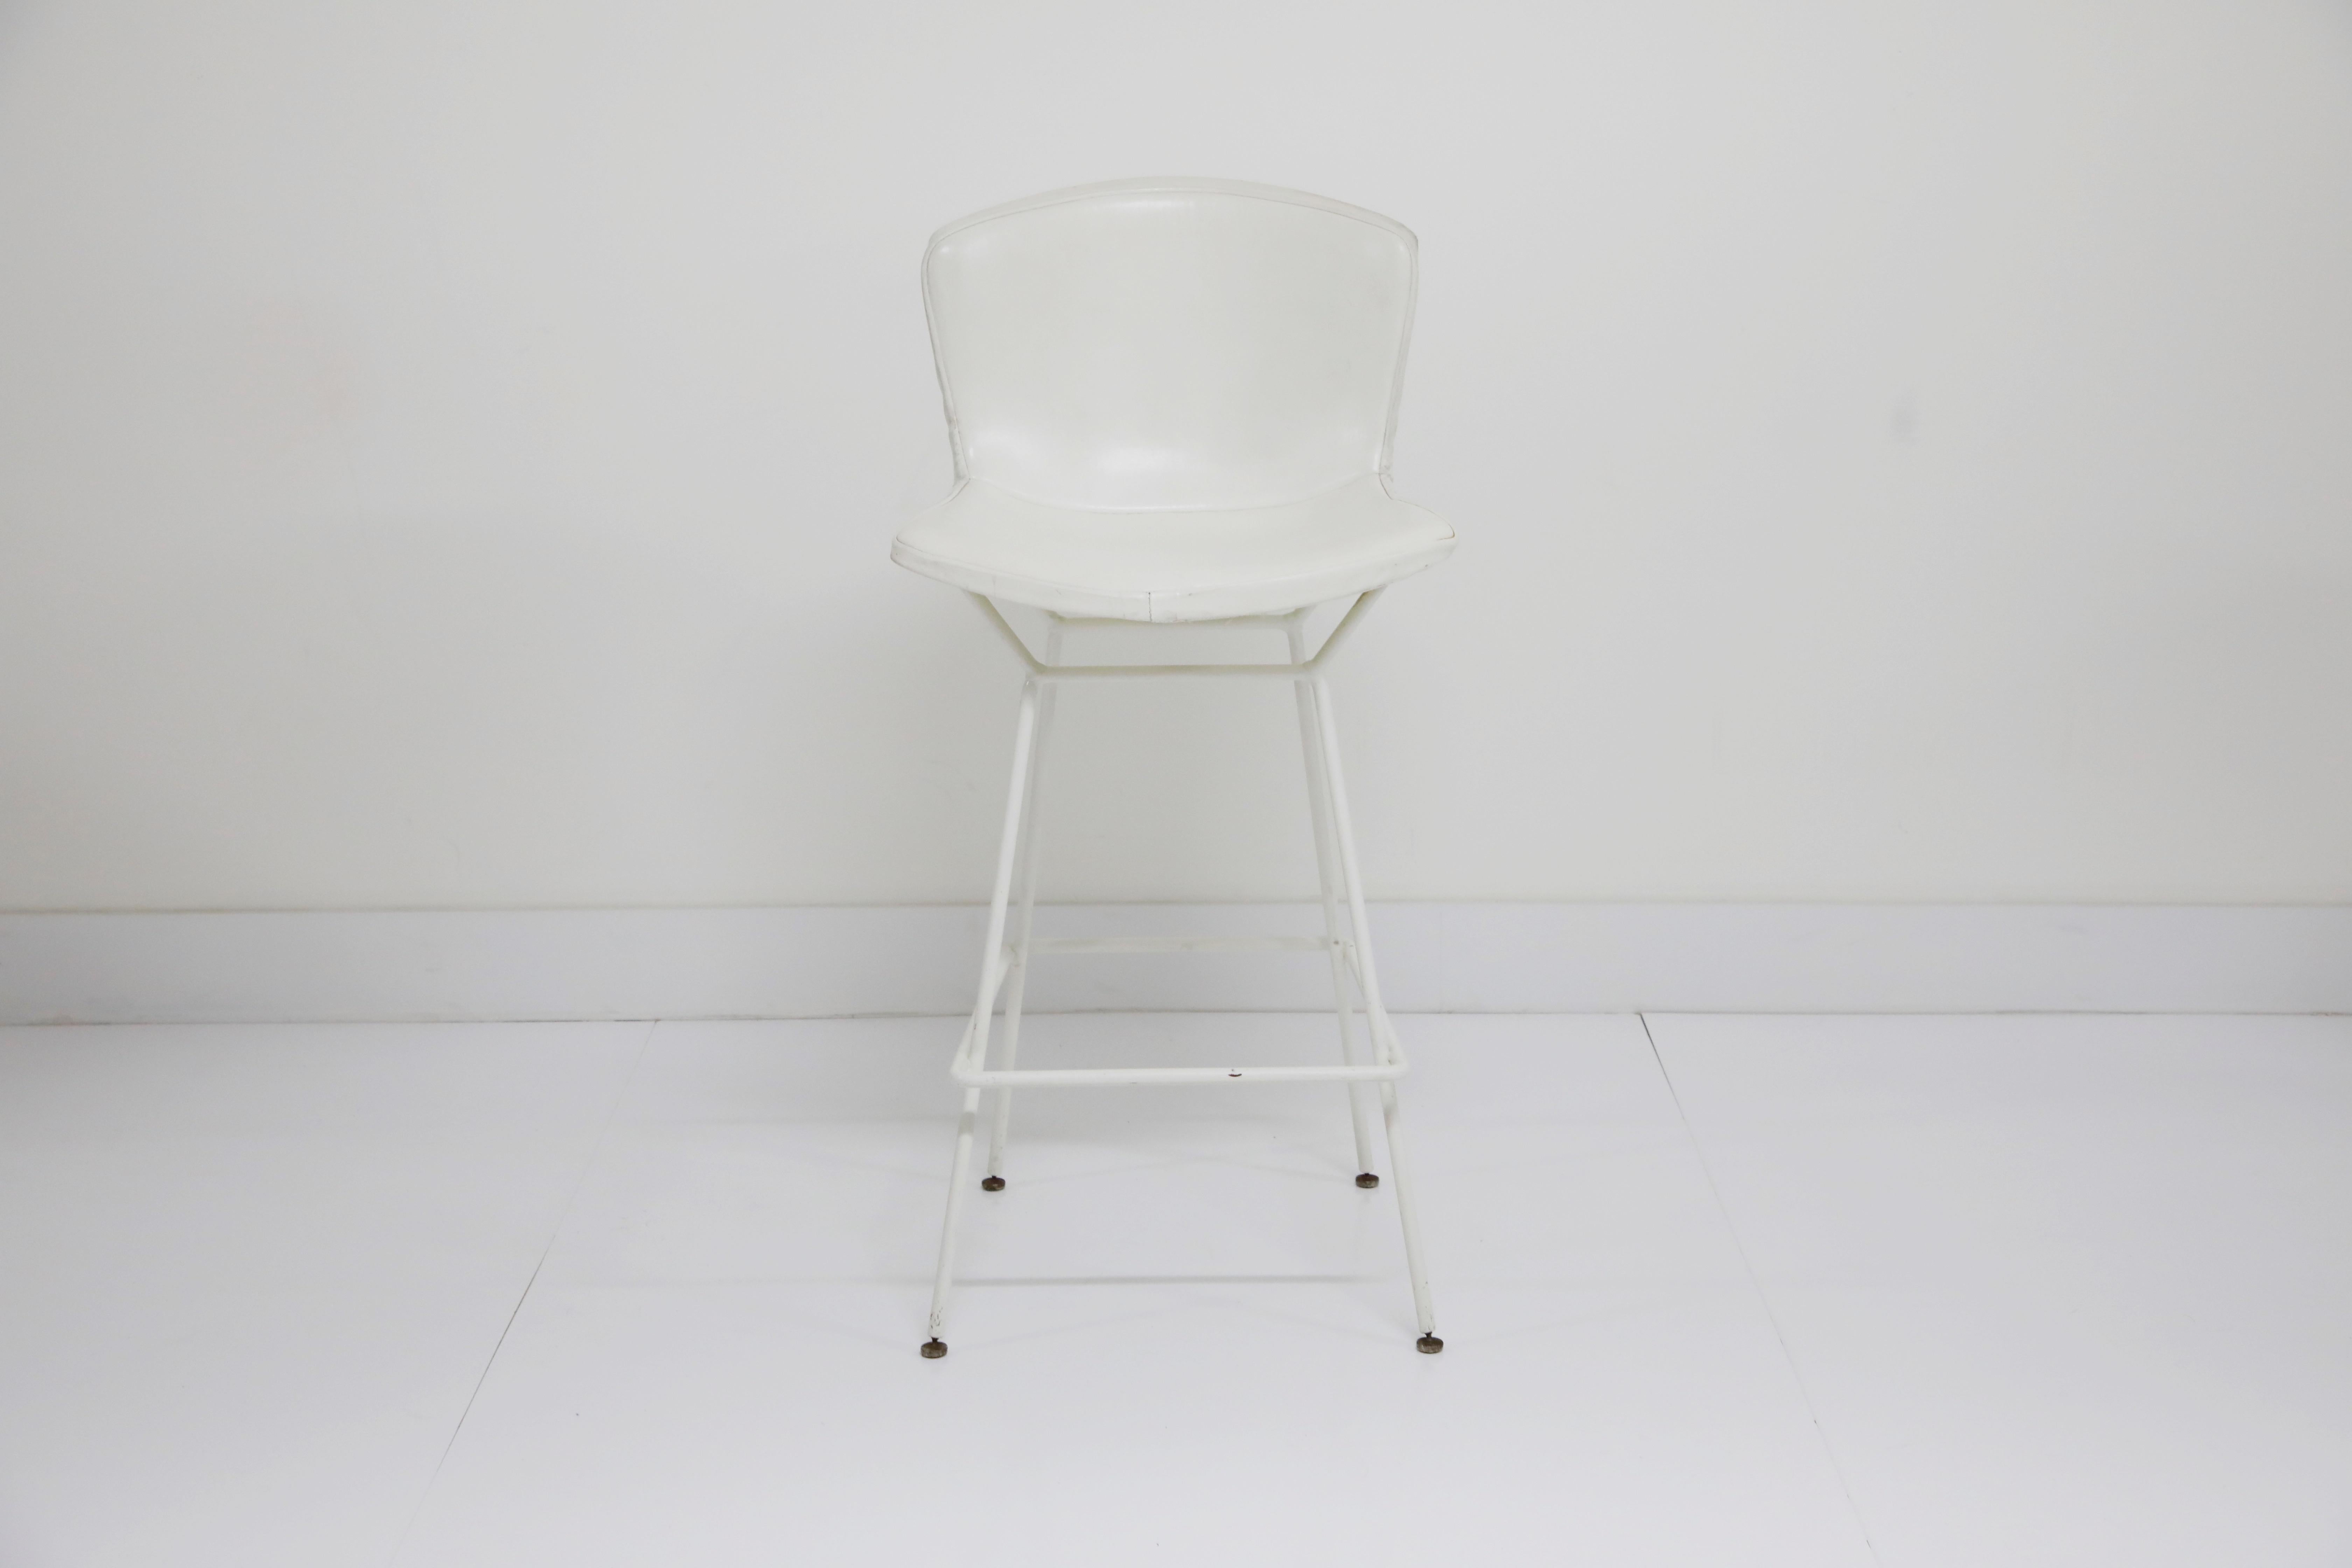 This early production and all original Harry Bertoia for Knoll Associates Molded Shell Bar Height (Model 428-C) Barstool is a first generation production from the mid/late 1950s to early 1960s and constructed of welded steel rods that make up the